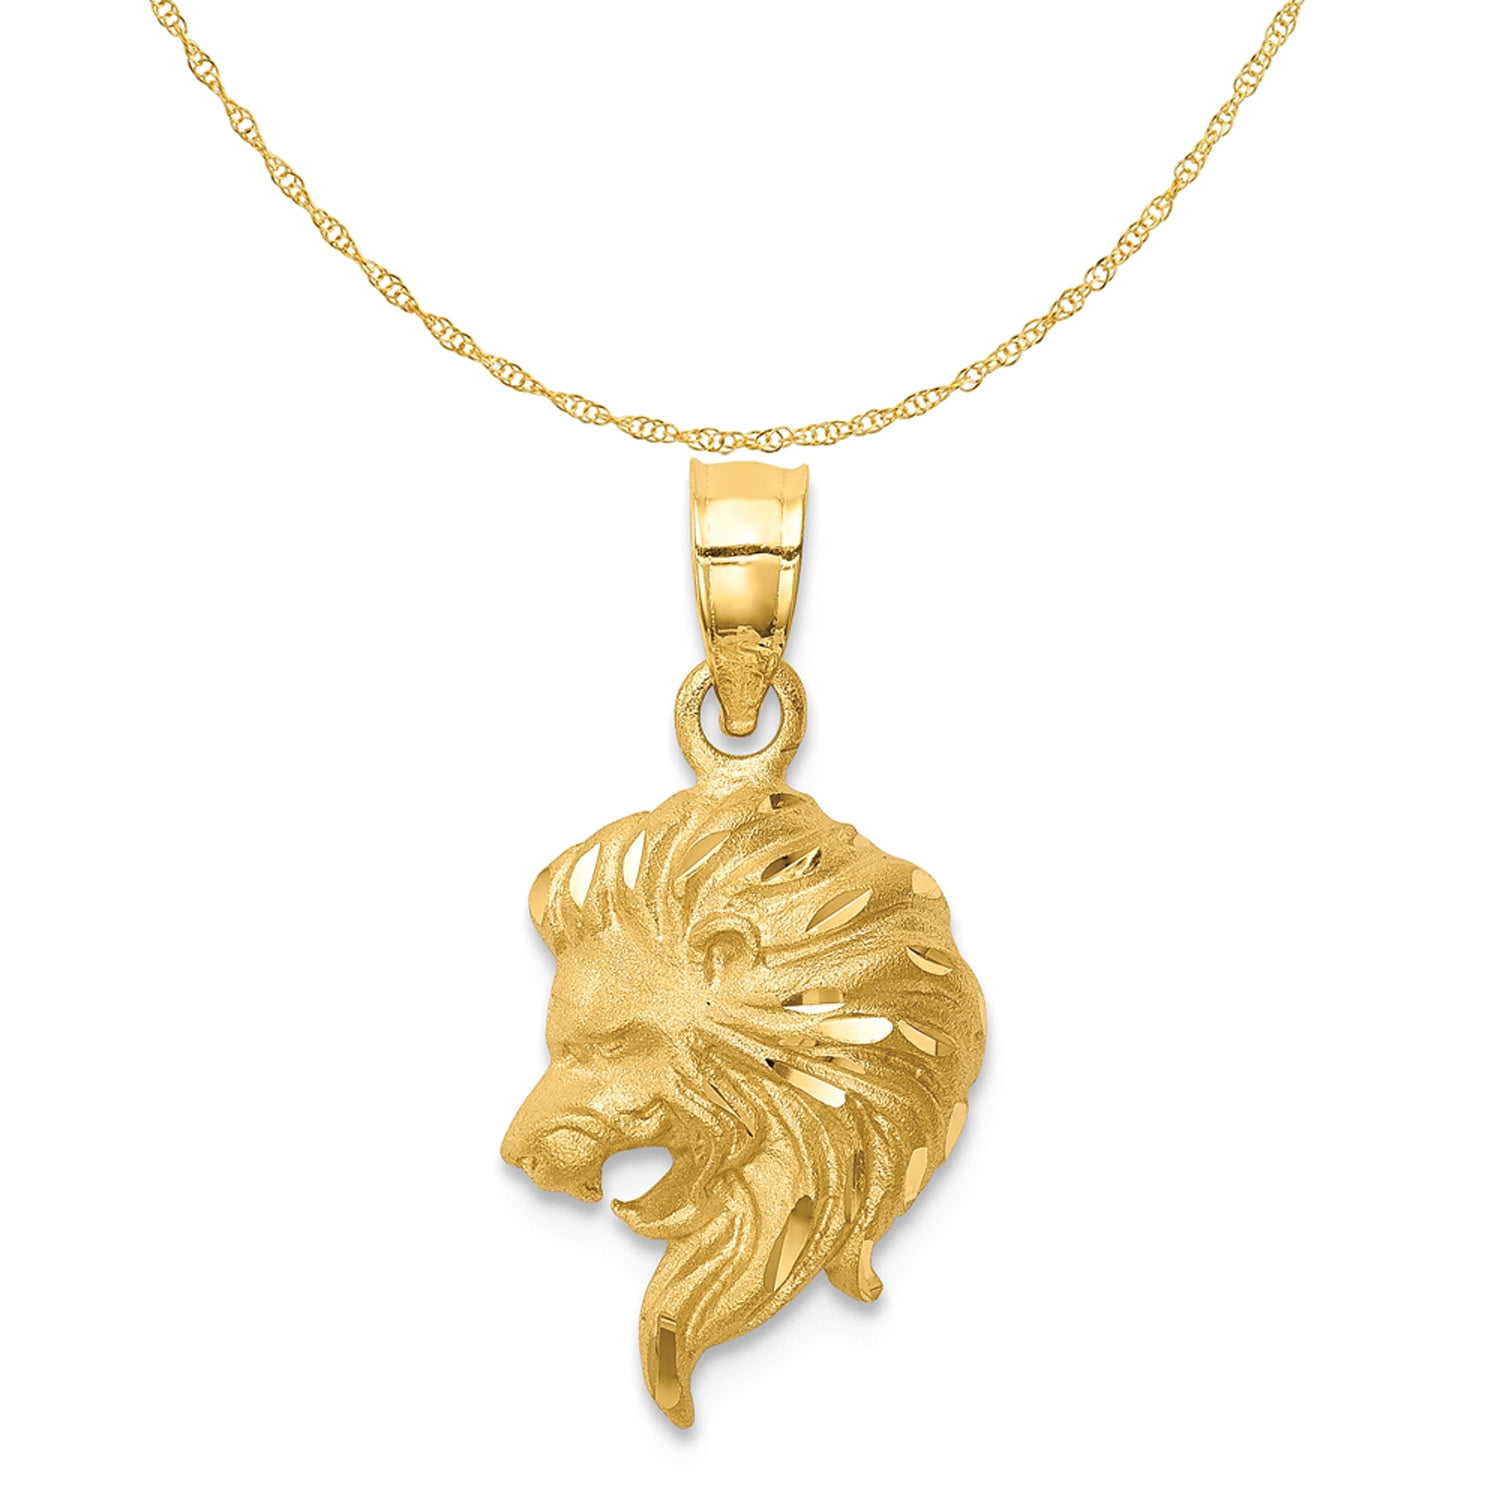 NYFASHION101 Stone Stud Roaring Tiger Head Pendant Pendant with 4mm Cuban Chain Necklace